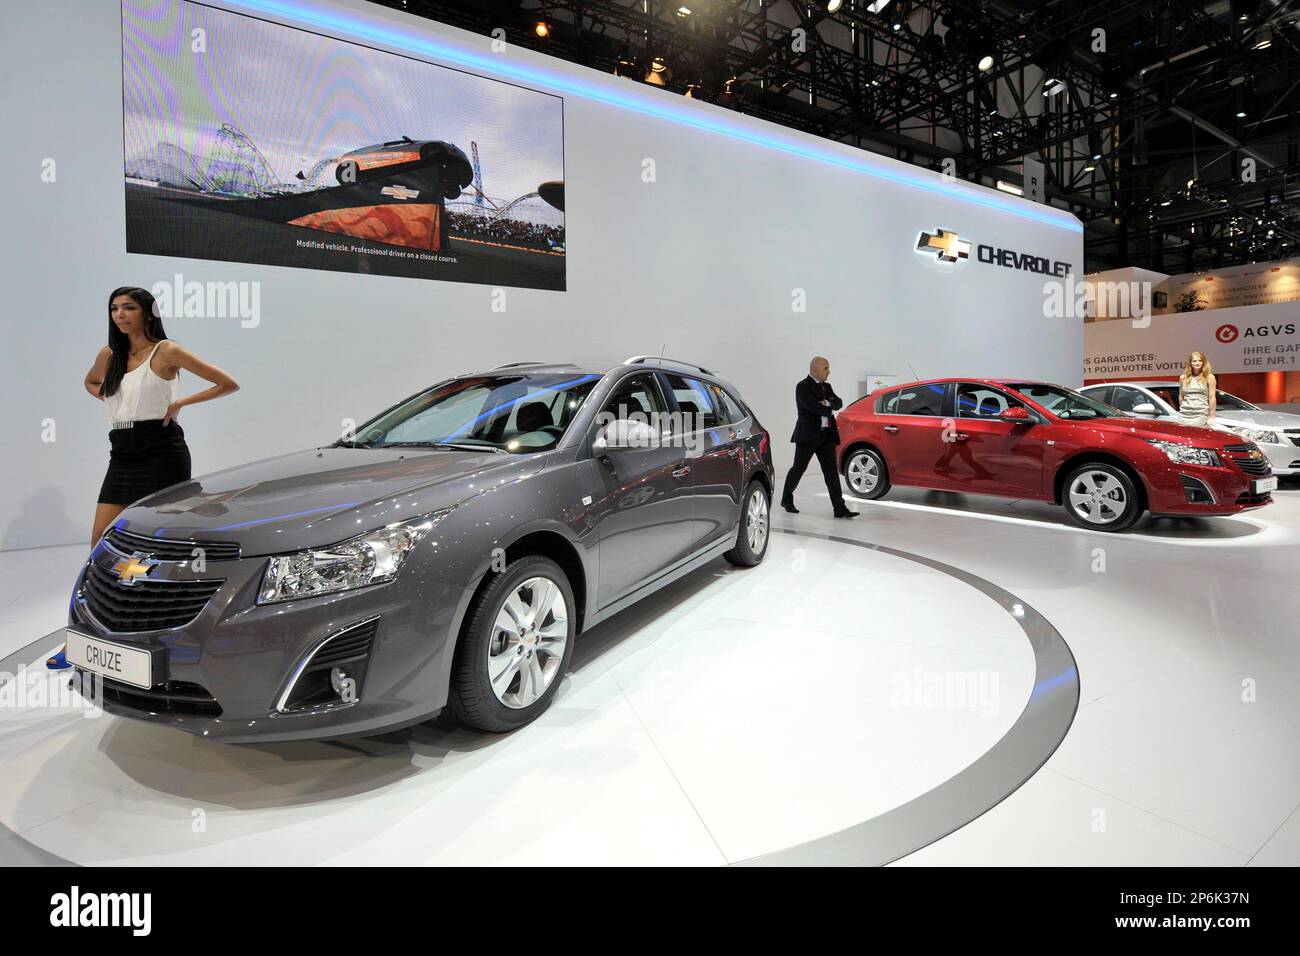 The new Chevrolet Cruze Station Wagon Break car is shown during the press  day at the 82st Geneva International Motor Show in Geneva, Switzerland,  Tuesday, March 6, 2012. The Motor Show will